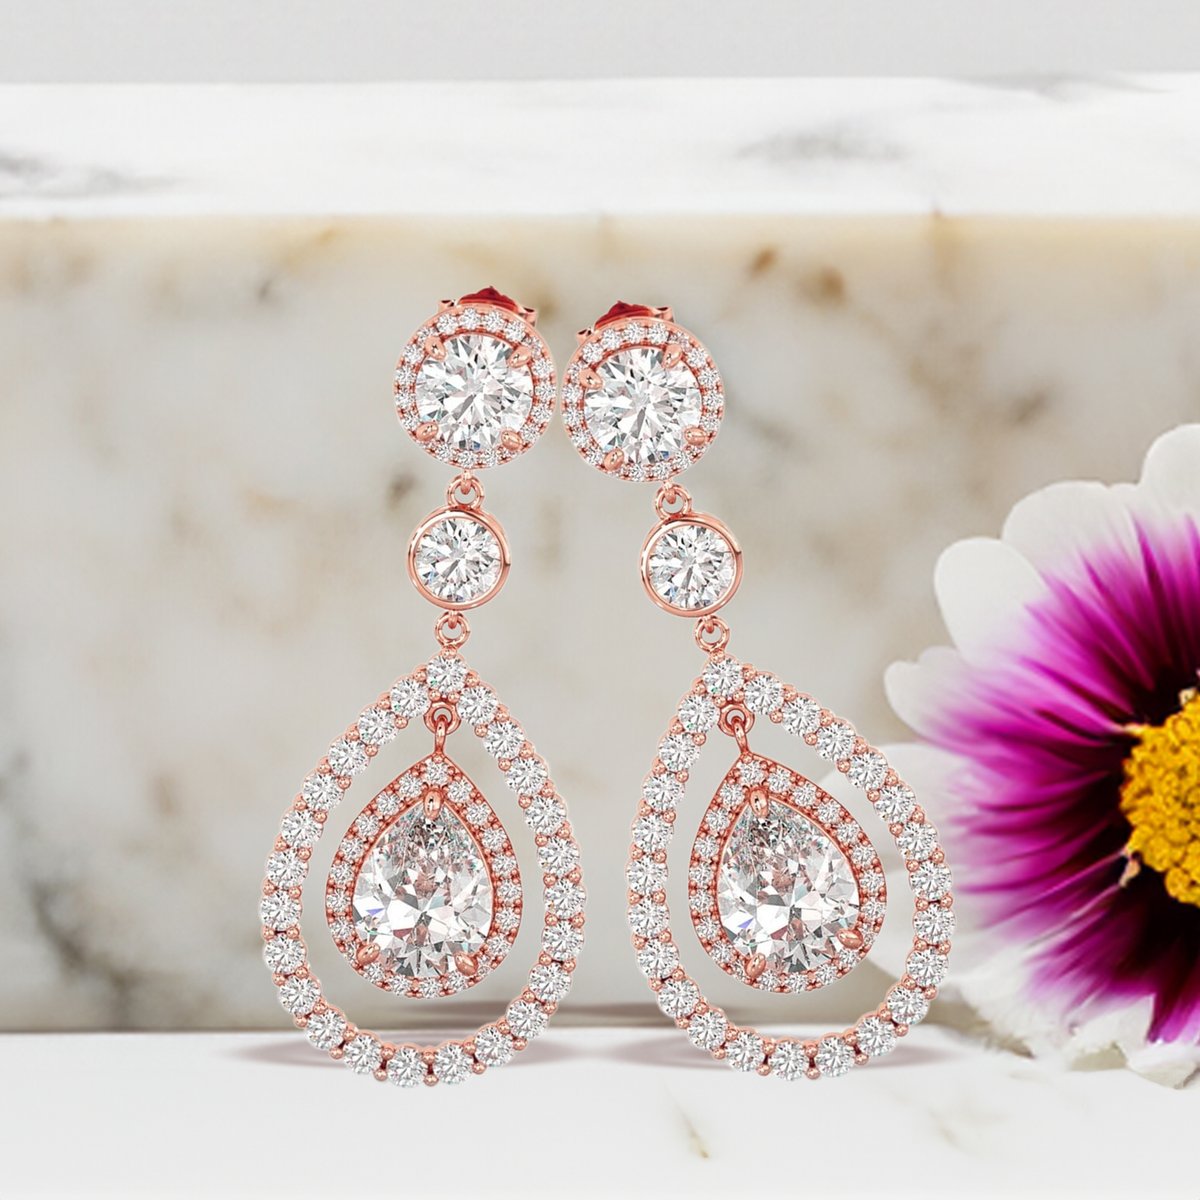 How irresistible are these? 💎💕 Click to buy bit.ly/3GylVK7 Code 741 #womenearrings #weddingearrings #lovejewelry #silverjewelry #sterlingsilver #cubiczirconia #fashion #besttohave #besttohavejewelry